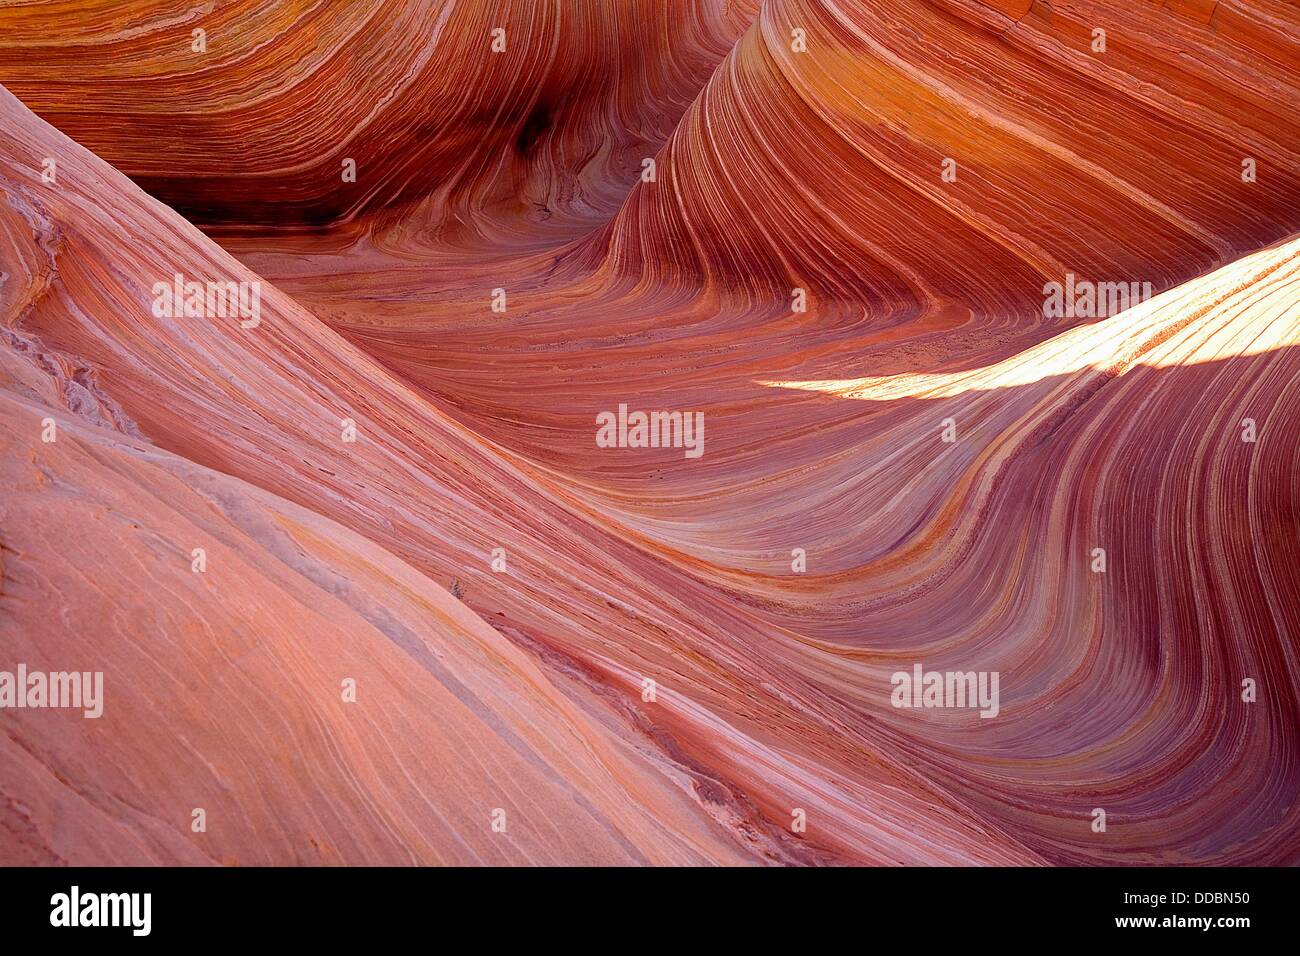 Swirls and curls produce ´The Wave´ at Coyote Buttes on the Arizona/Uyah border. Stock Photo